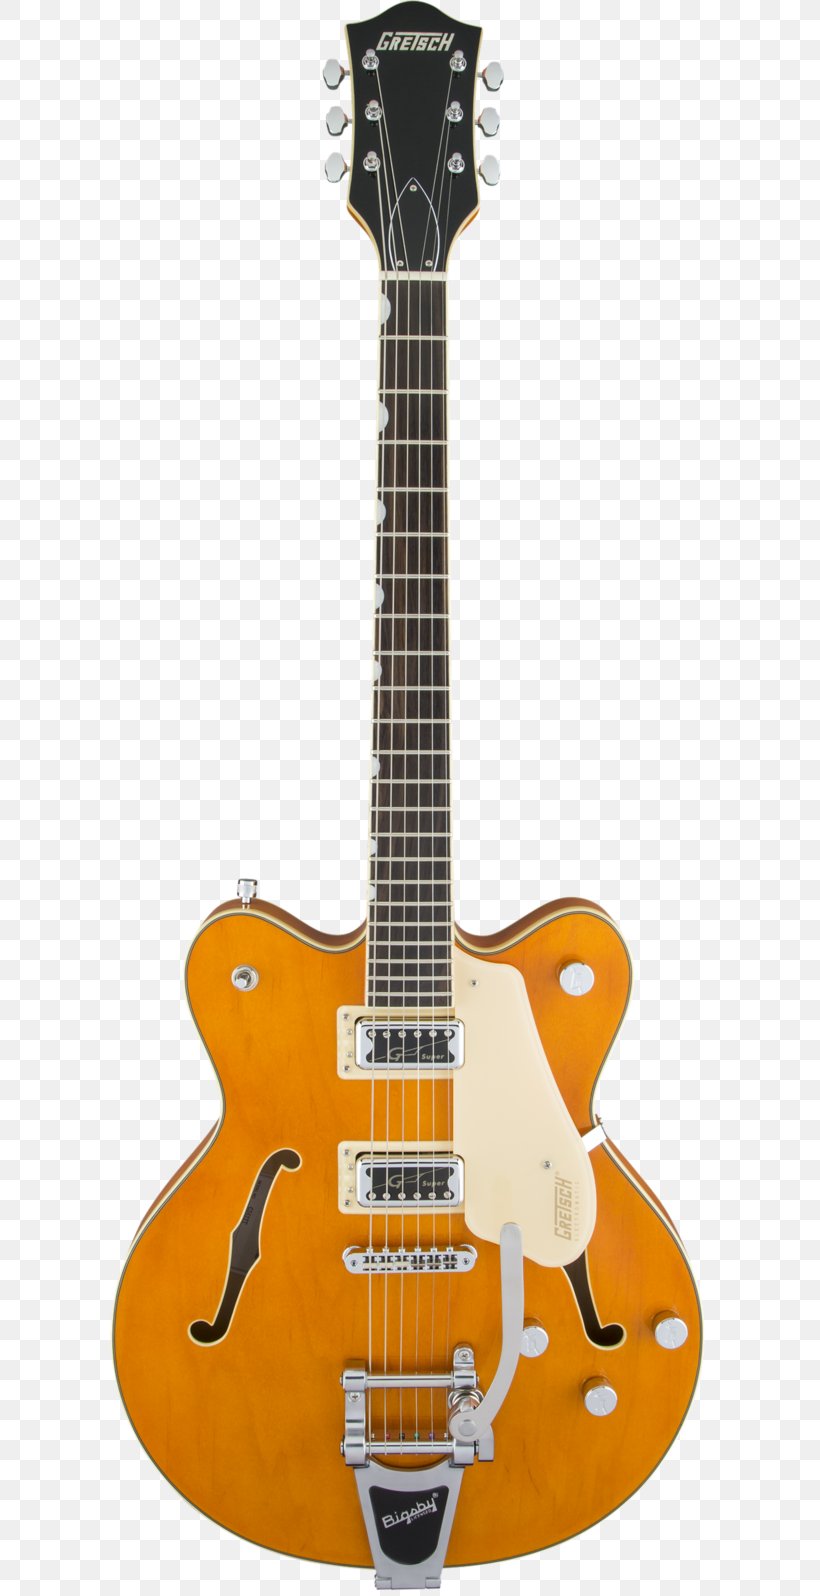 Gretsch Semi-acoustic Guitar Bigsby Vibrato Tailpiece Archtop Guitar, PNG, 600x1596px, Gretsch, Acoustic Electric Guitar, Acoustic Guitar, Archtop Guitar, Bass Guitar Download Free